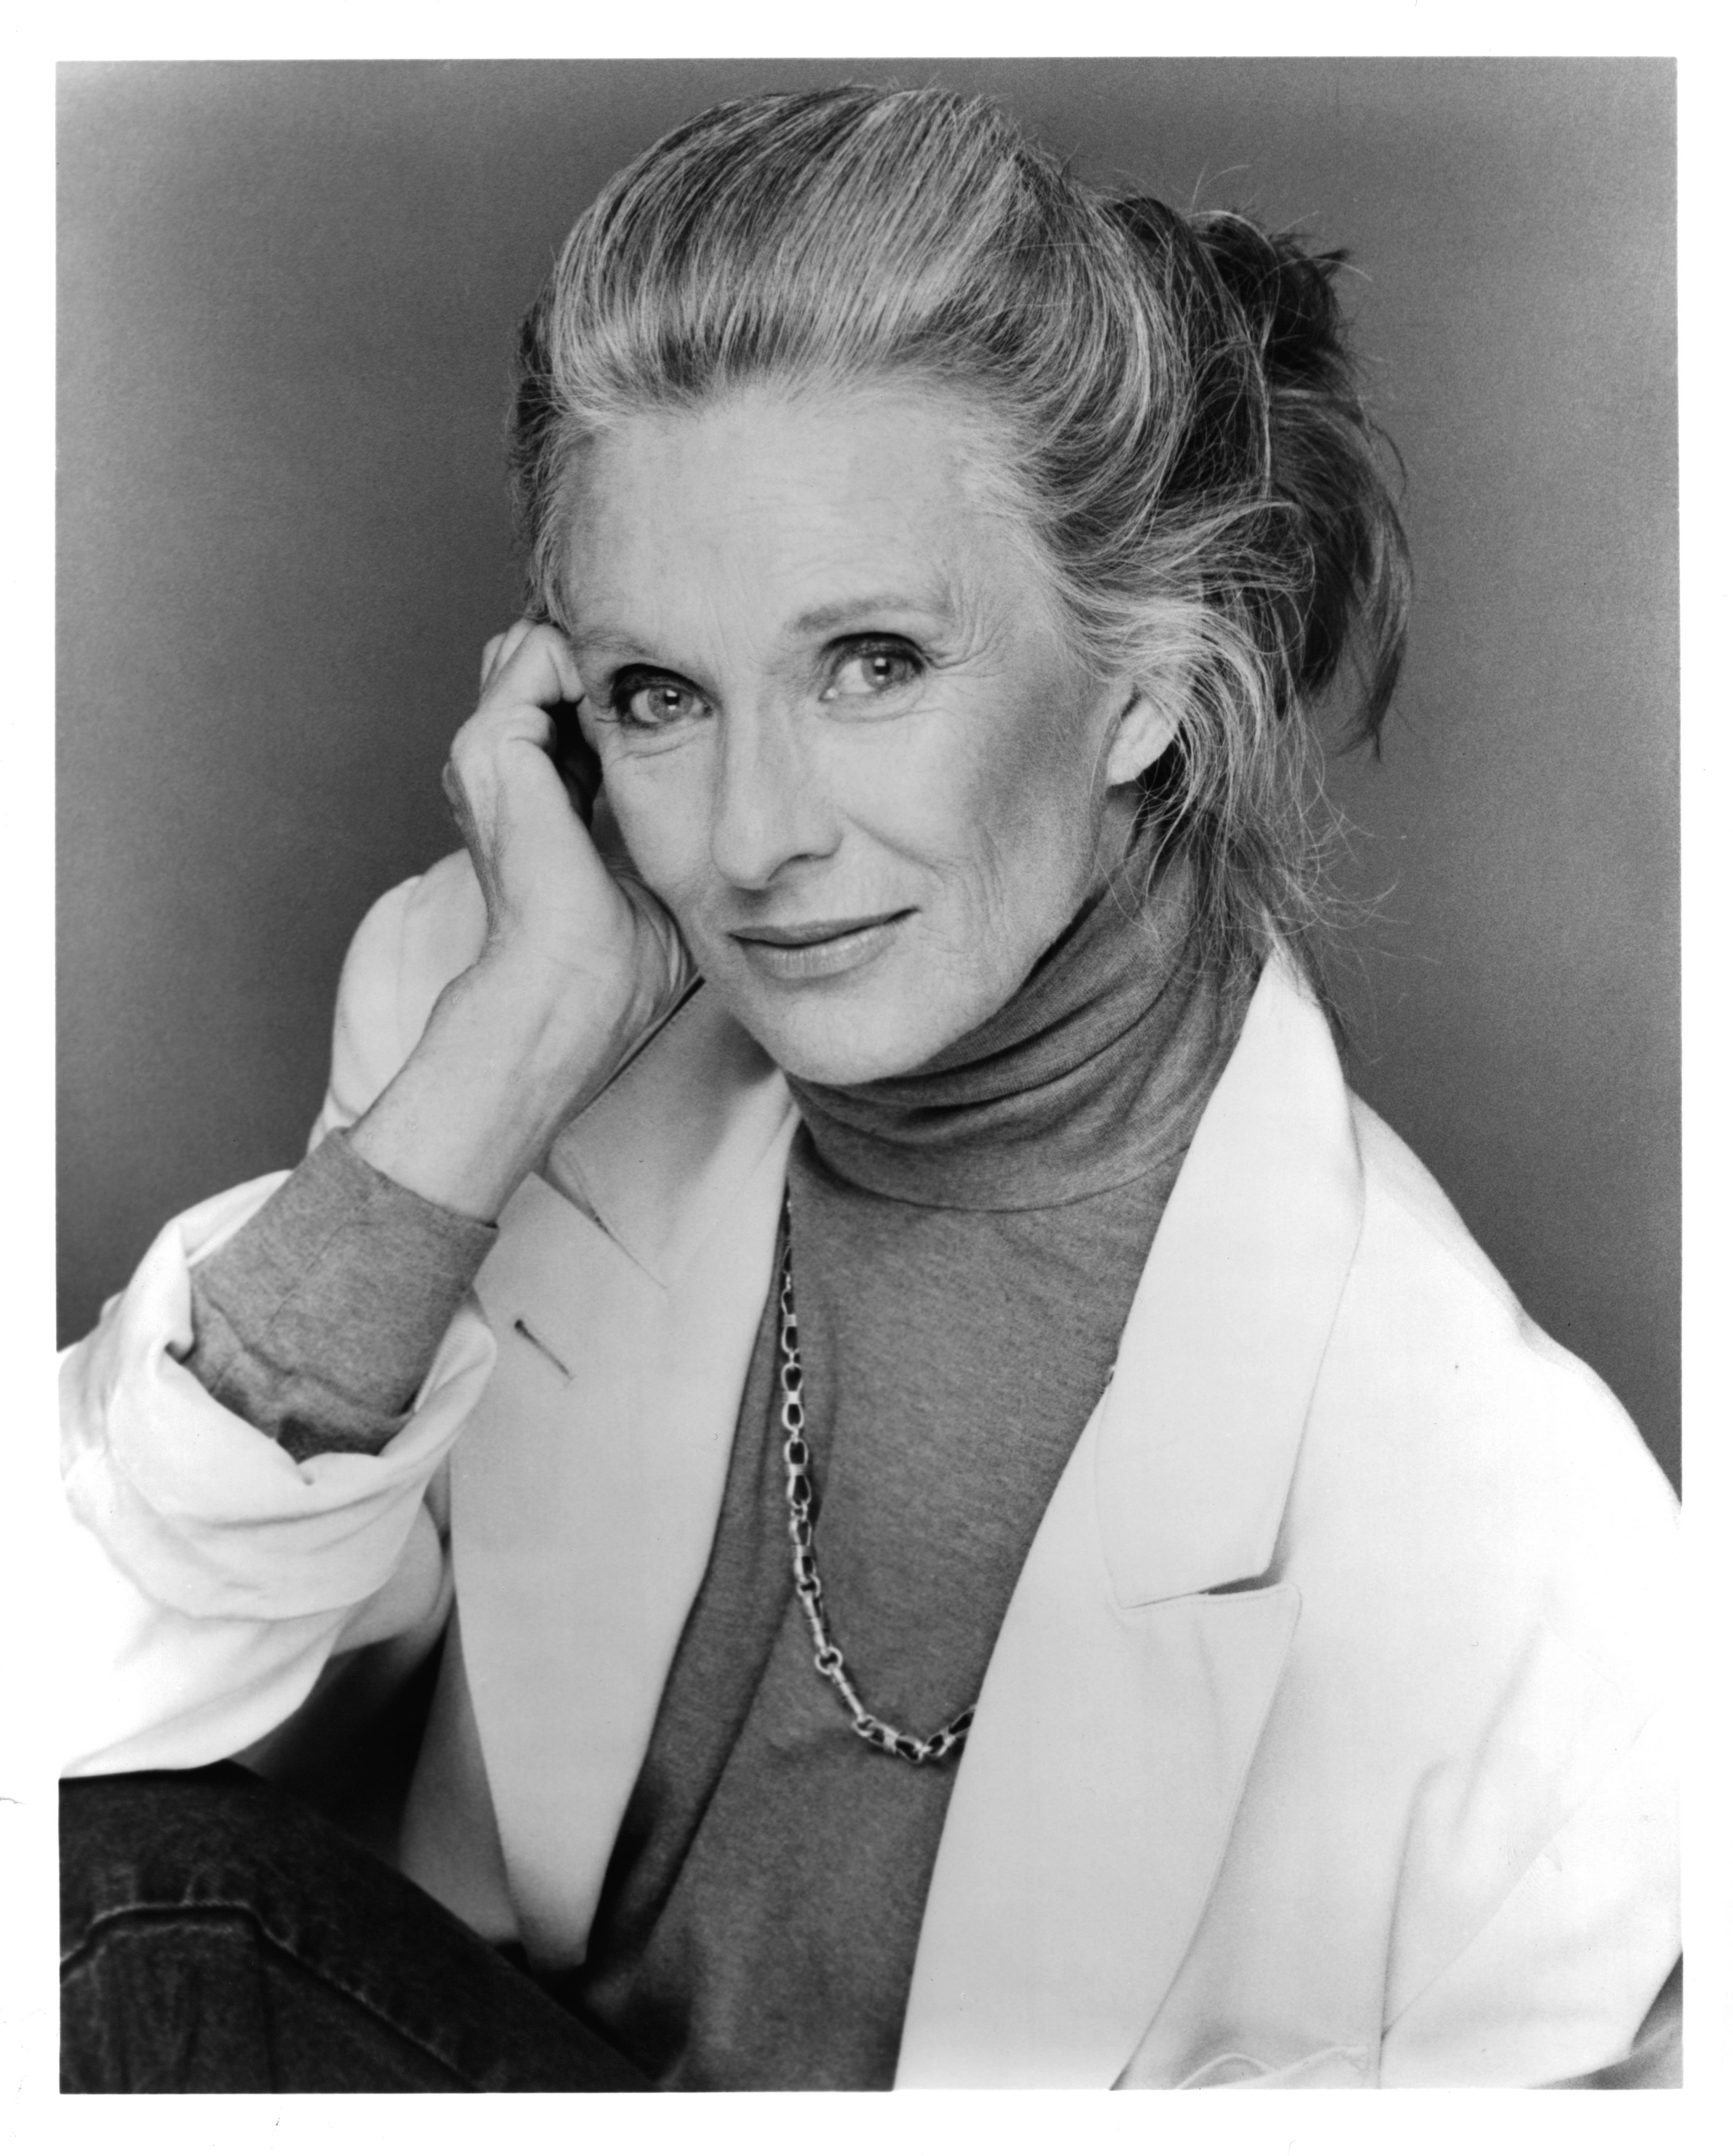 Cloris Leachman posing for a portrait while wearing in a blazer paired with a turtle neck in 1985. / Source: Getty Images